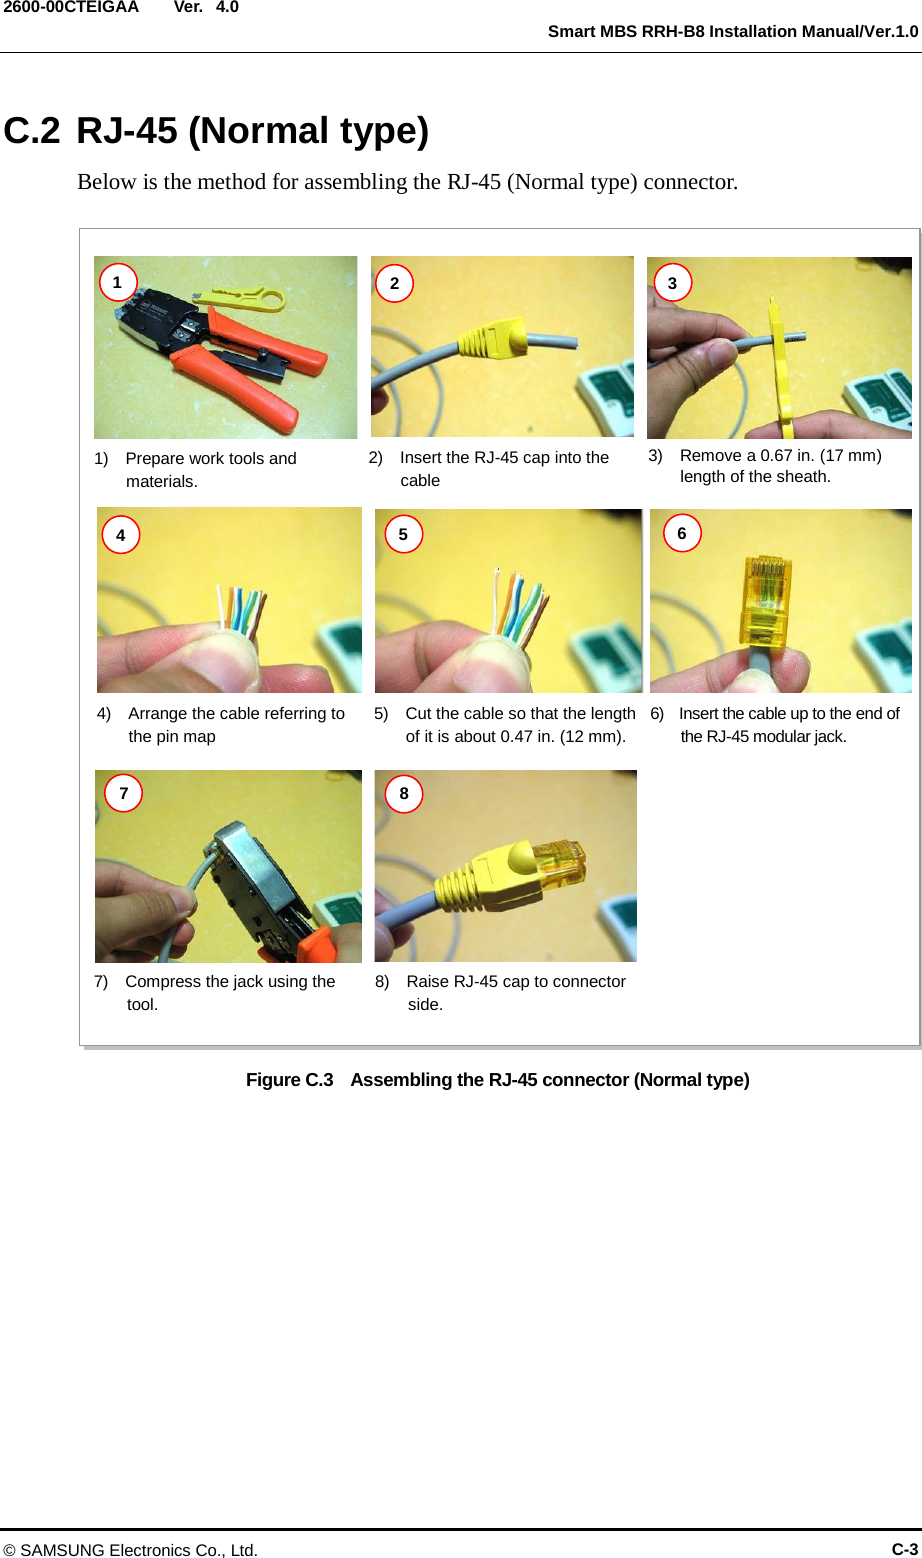  Ver.   Smart MBS RRH-B8 Installation Manual/Ver.1.0 2600-00CTEIGAA 4.0 C.2 RJ-45 (Normal type) Below is the method for assembling the RJ-45 (Normal type) connector.  Figure C.3  Assembling the RJ-45 connector (Normal type)  1)  Prepare work tools and materials. 2)   Insert the RJ-45 cap into the cable 3)   Remove a 0.67 in. (17 mm) length of the sheath. 4)  Arrange the cable referring to the pin map 5)  Cut the cable so that the length of it is about 0.47 in. (12 mm). 1 2 3 4 5 6 7 8 7)  Compress the jack using the tool. 6)  Insert the cable up to the end of the RJ-45 modular jack. 8)  Raise RJ-45 cap to connector   side. © SAMSUNG Electronics Co., Ltd. C-3 